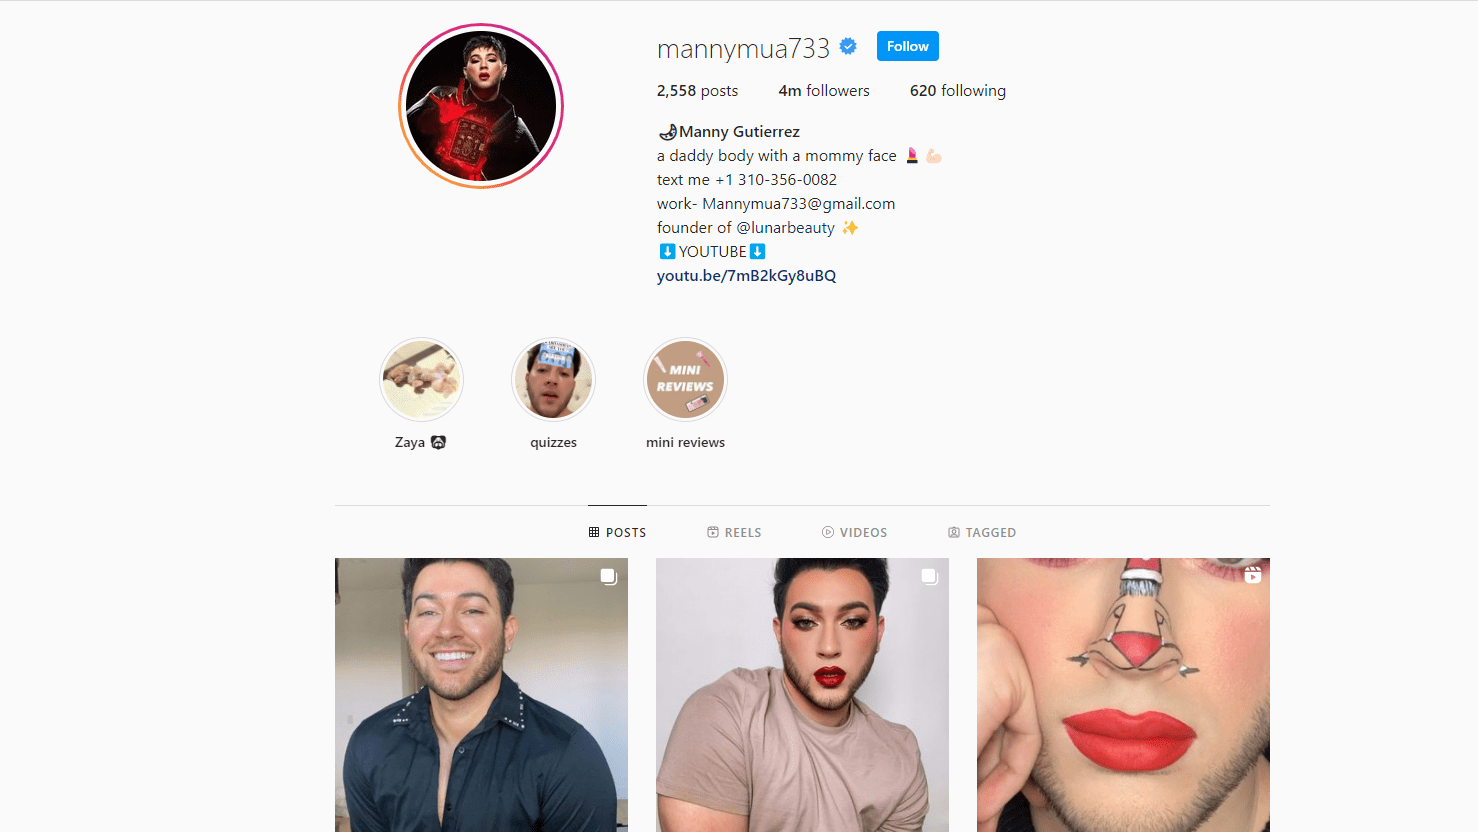 manny-mua-youtube-strategy-for-personal-branding